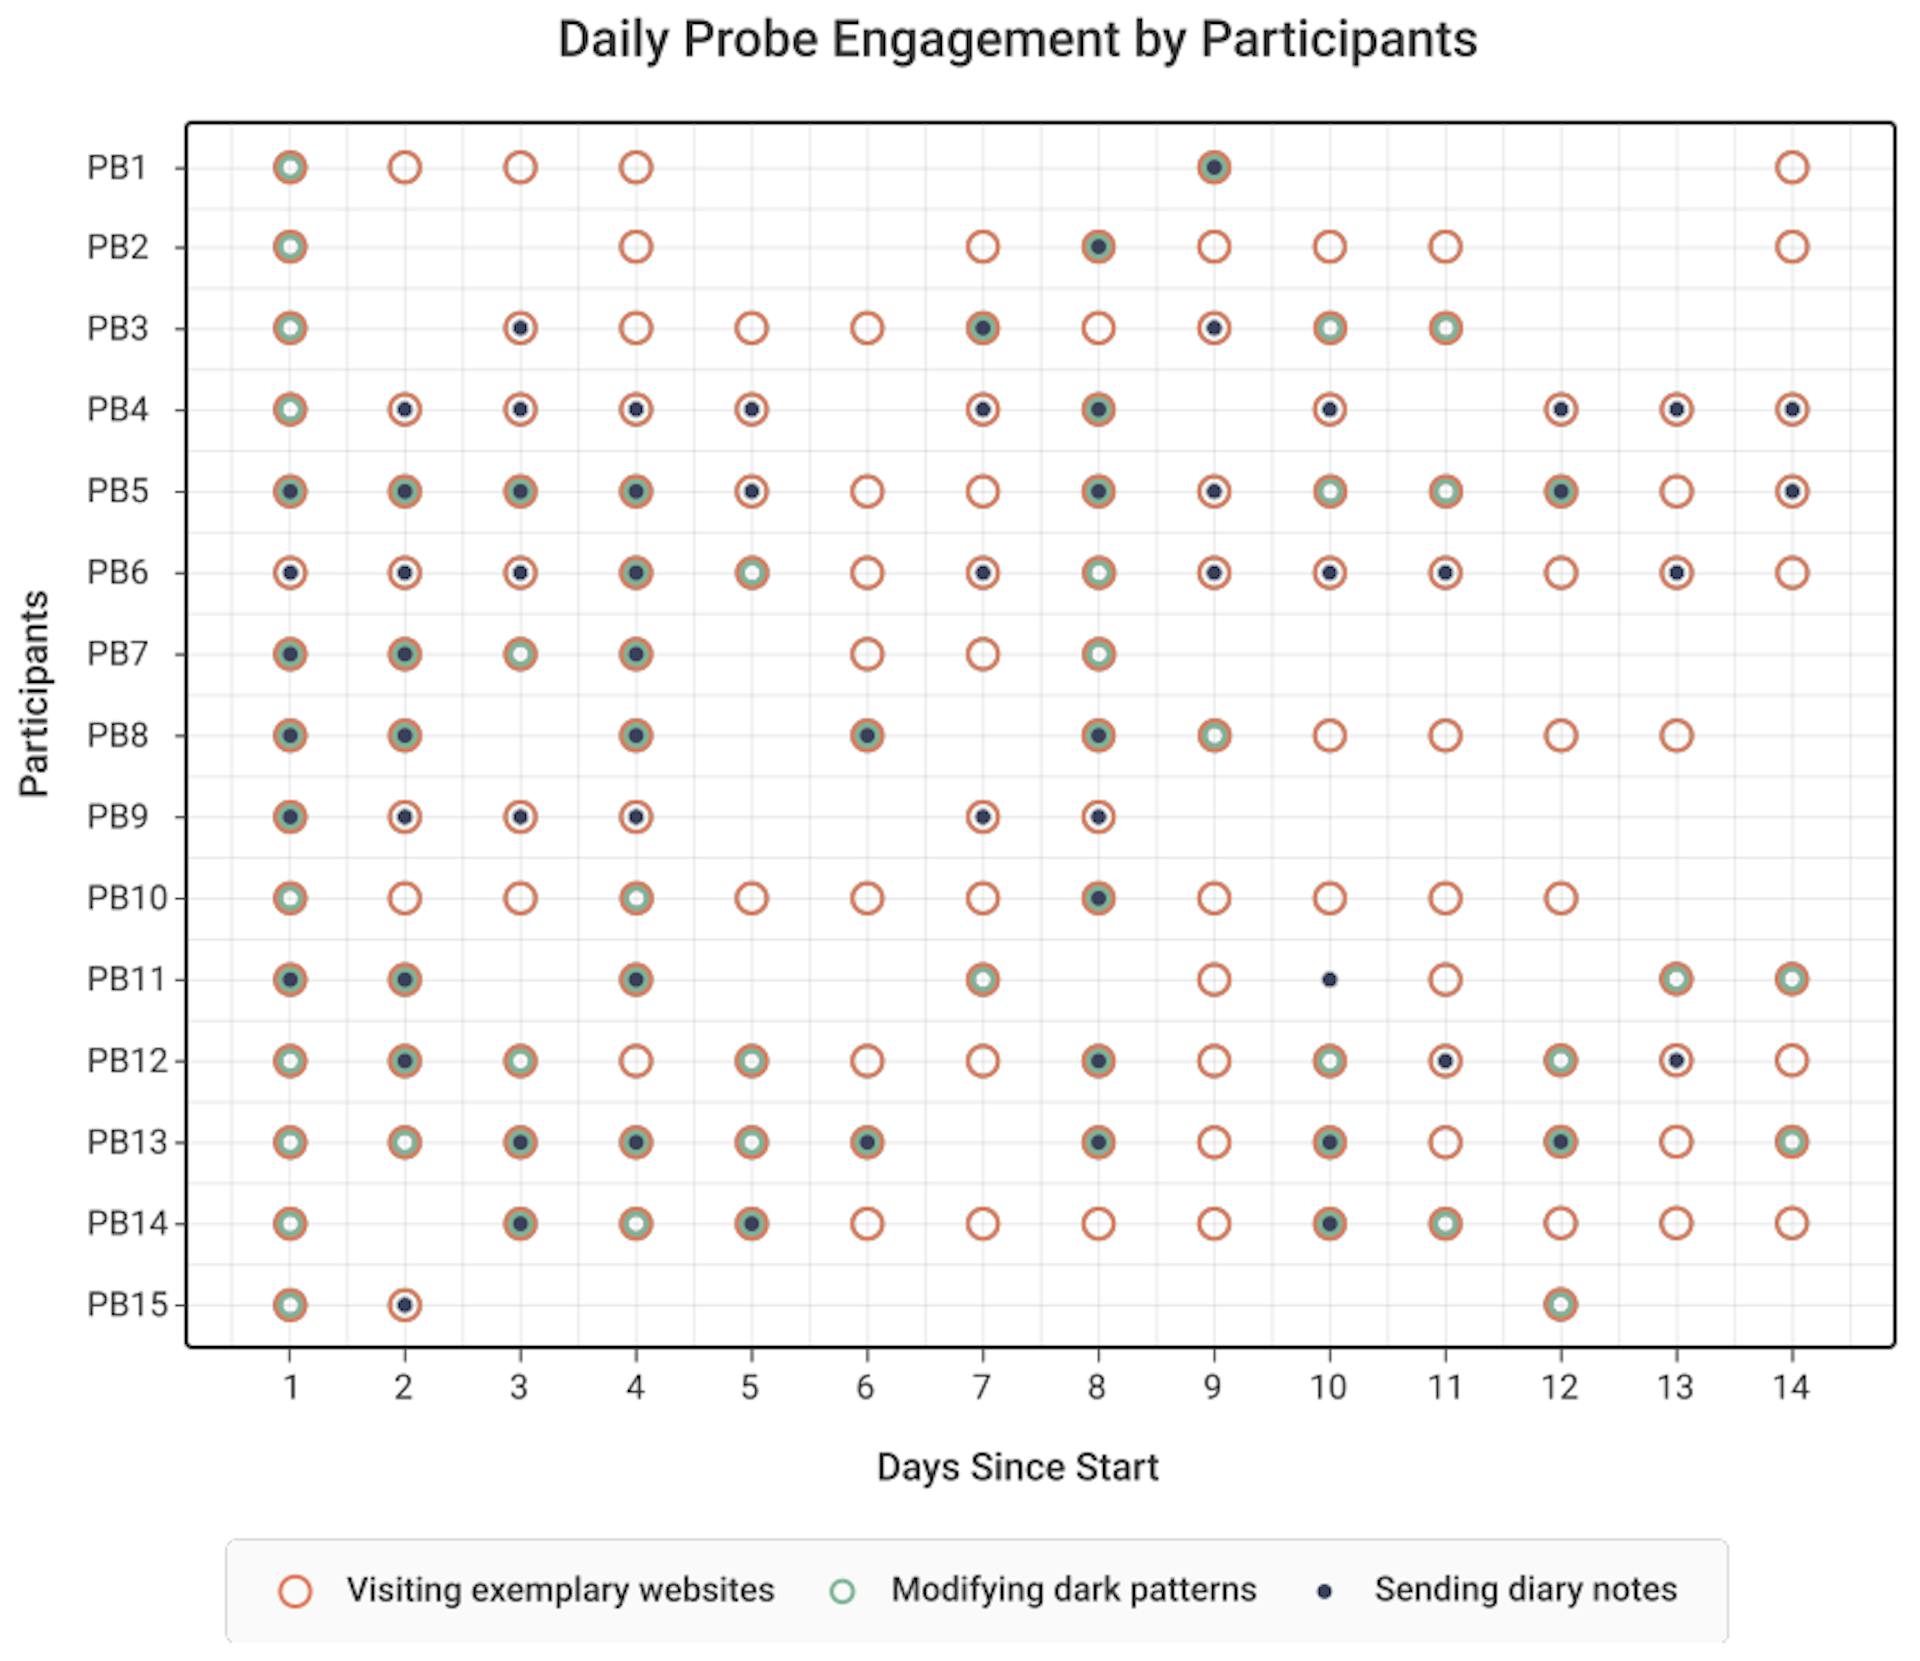 Fig. 6. The daily probe engagement of our participants. Red and green circles denote participants who visited sites containing dark pattern instances or modified dark pattern instances with UI enhancements at least once on that day, respectively. The blue dots denote participants who sent diary notes at least once on that day. The touchpoints (mid-study check-in interviews) were on Day 8.